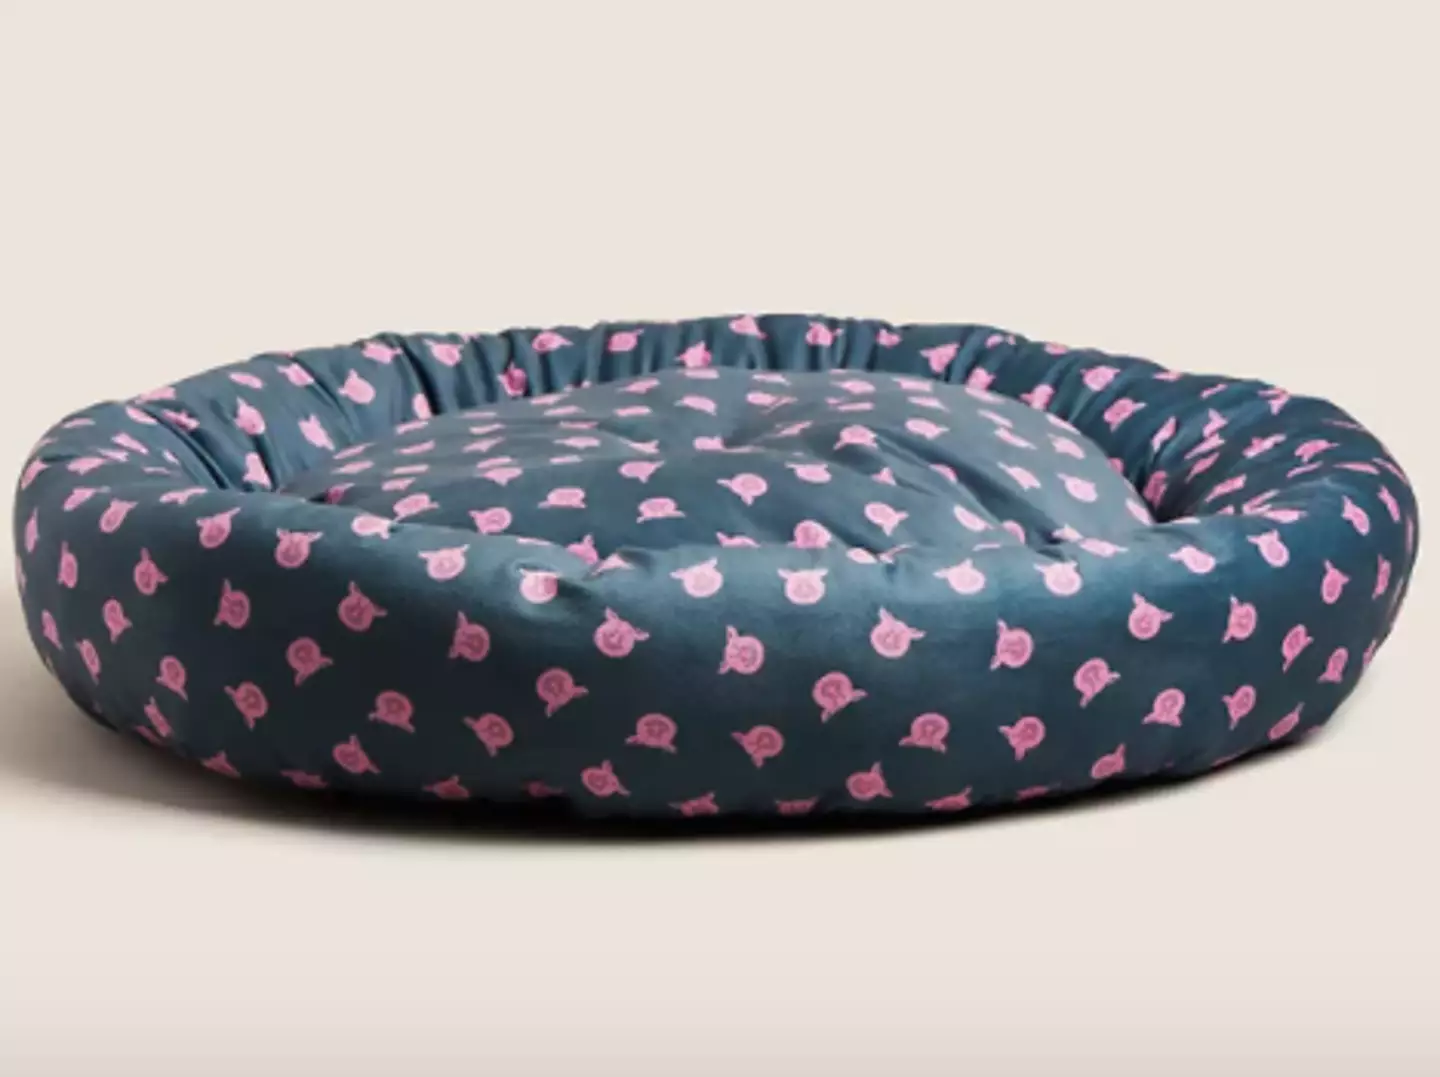 You can also get your hands on a Percy Pig dog bed (